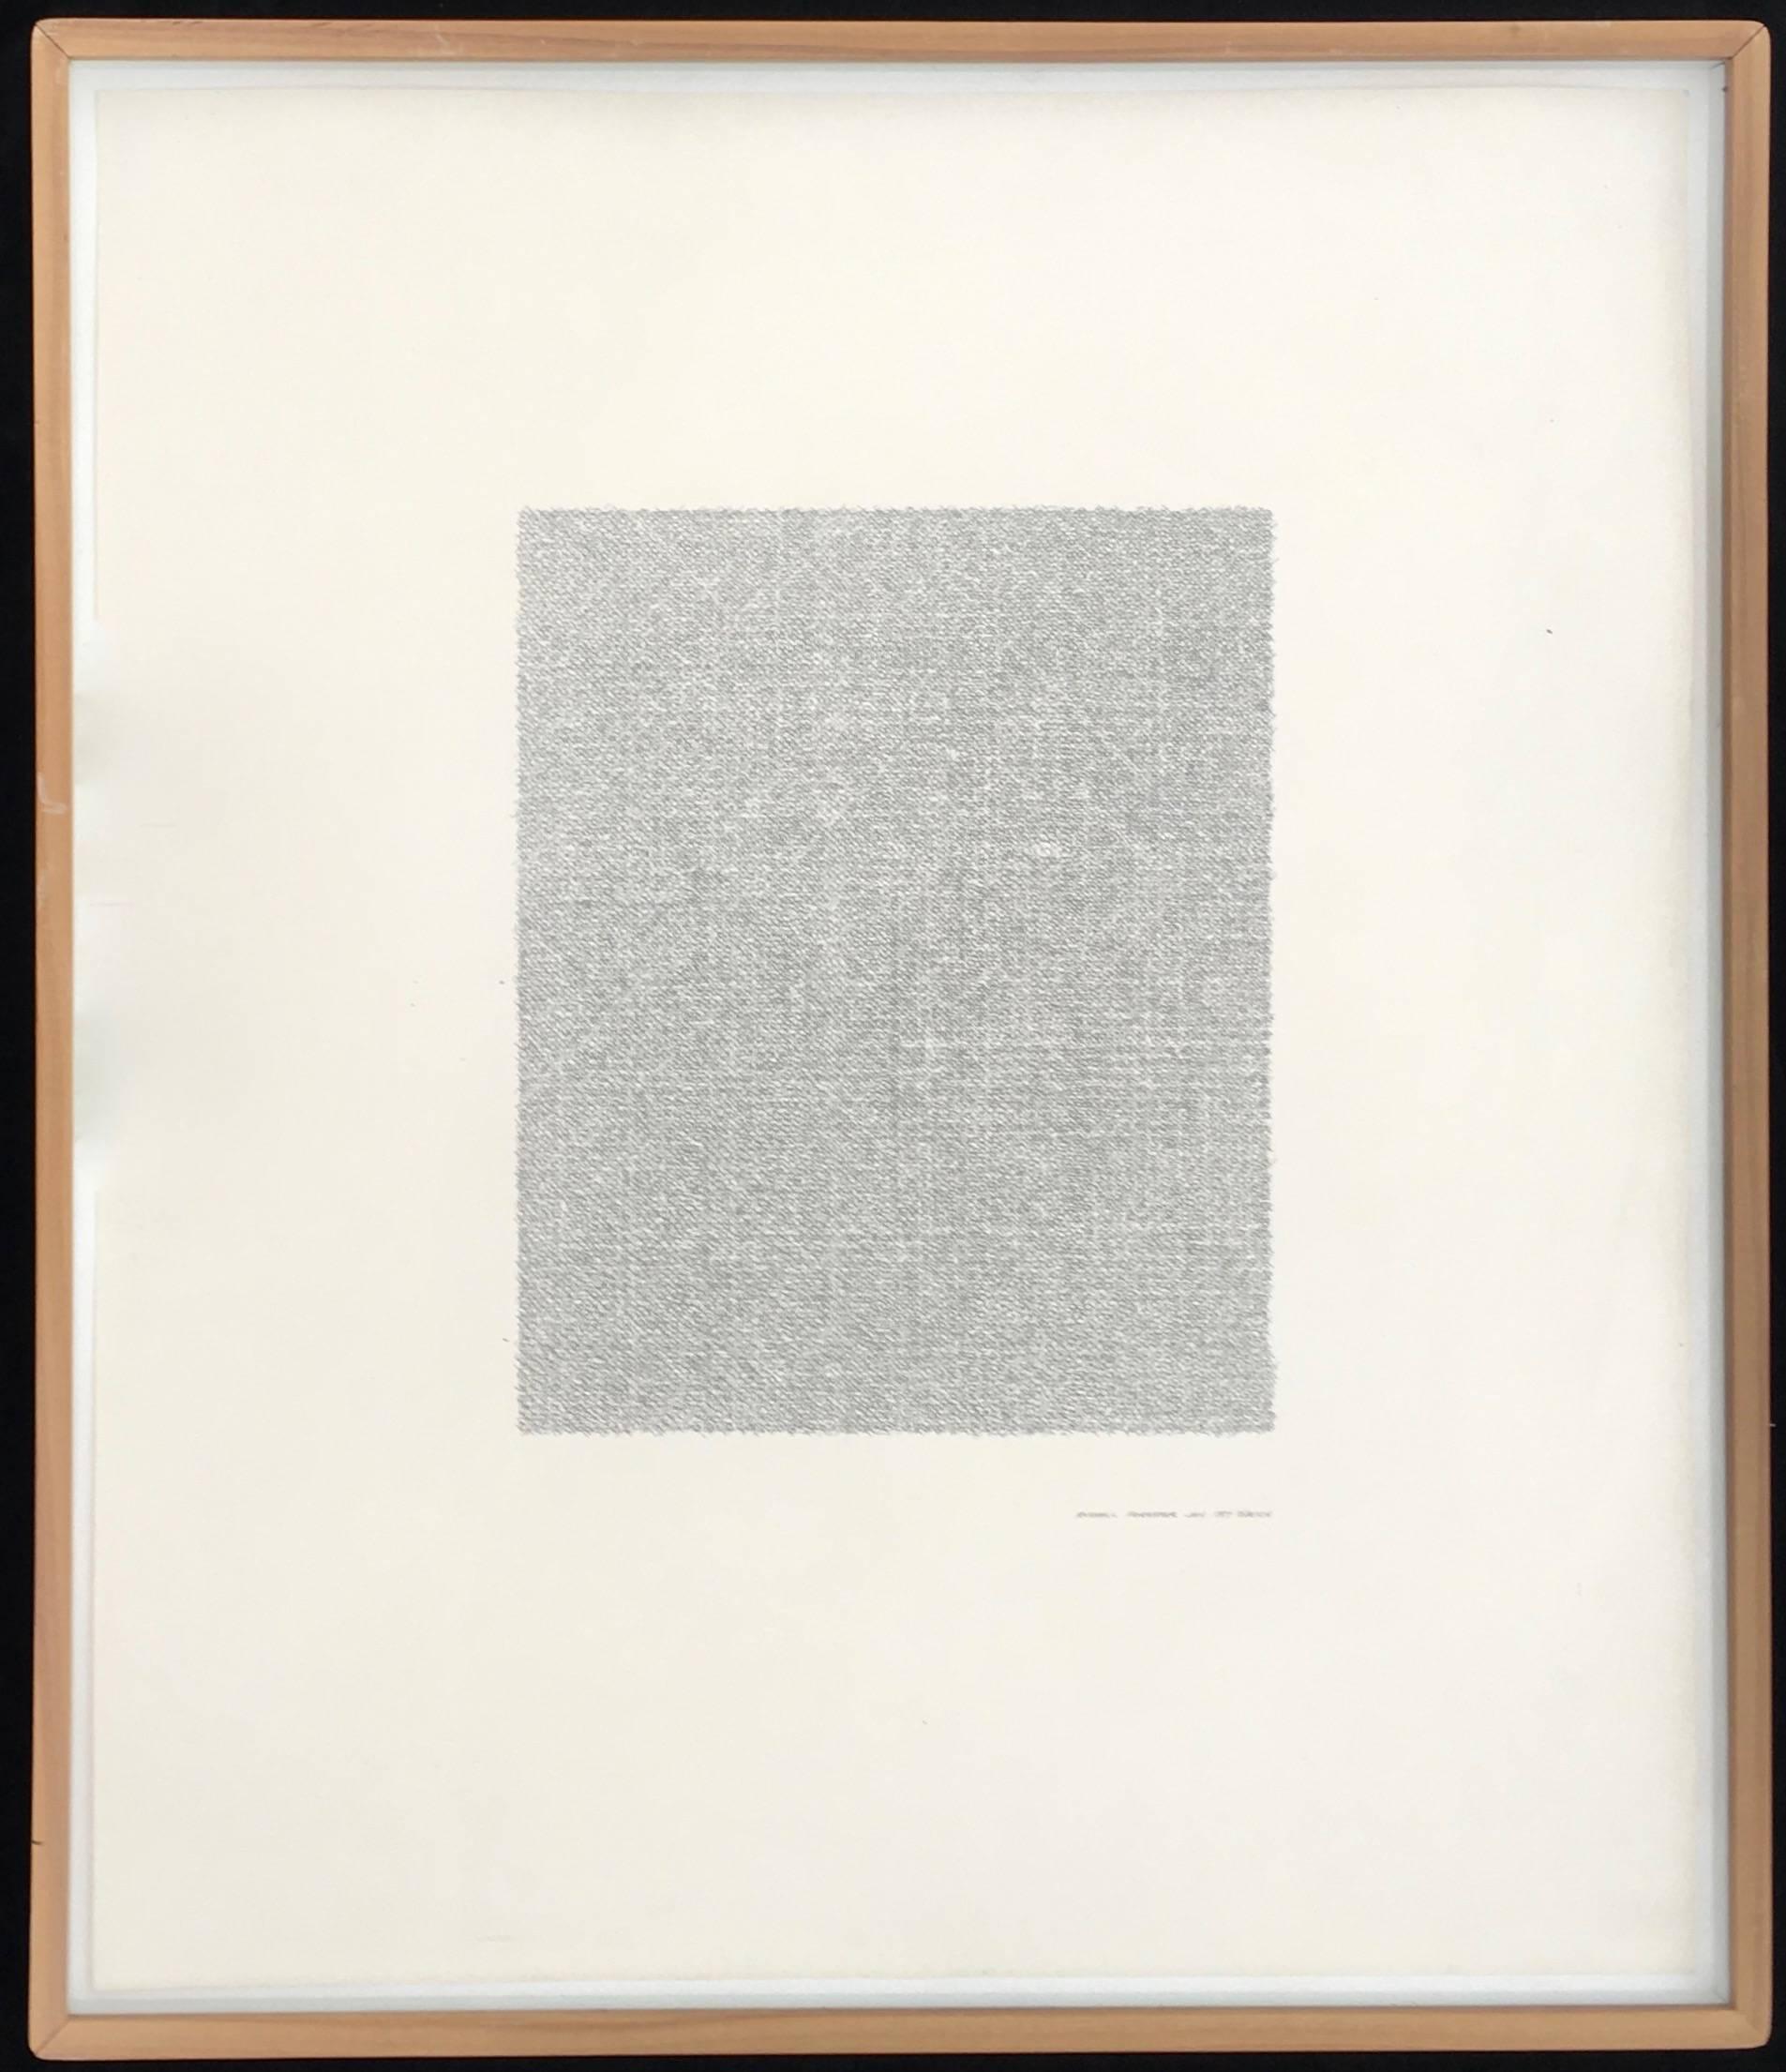 Russell Forester.
Untitled abstraction.
1977.
Ink on paper.
28 x 22 inches (sheet).
Signed, inscribed and dated lower right.
Excellent condition.
Archivally framed.

Russell Forester (1920-2002) was an architect and artist working in San